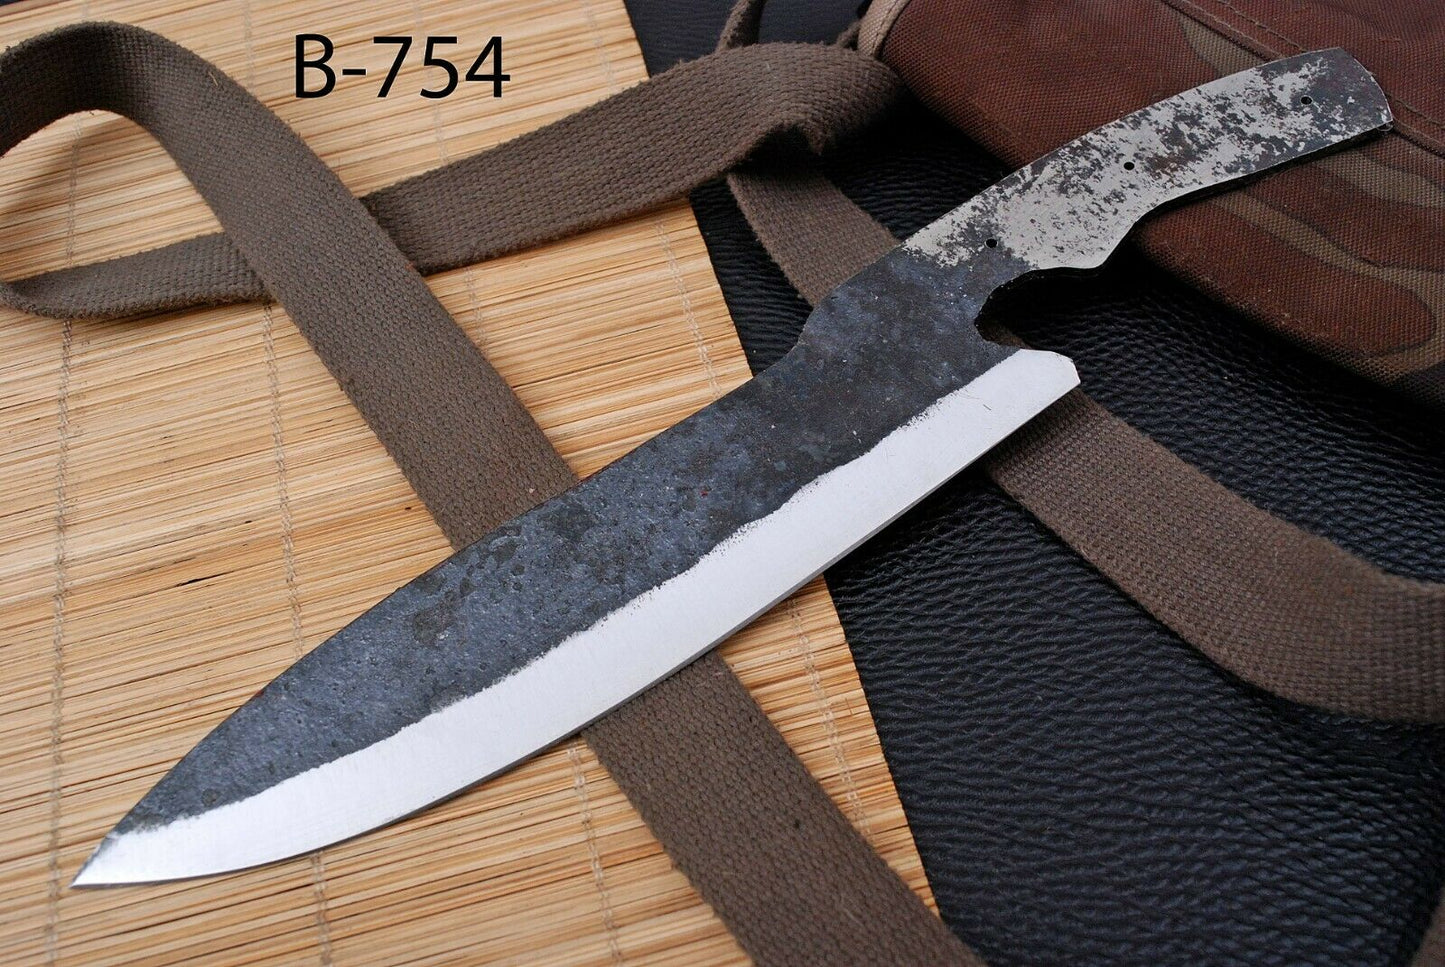 Hand Forged Railroad Spike Carbon Steel Chef Knife Blank Blade for Knife Making